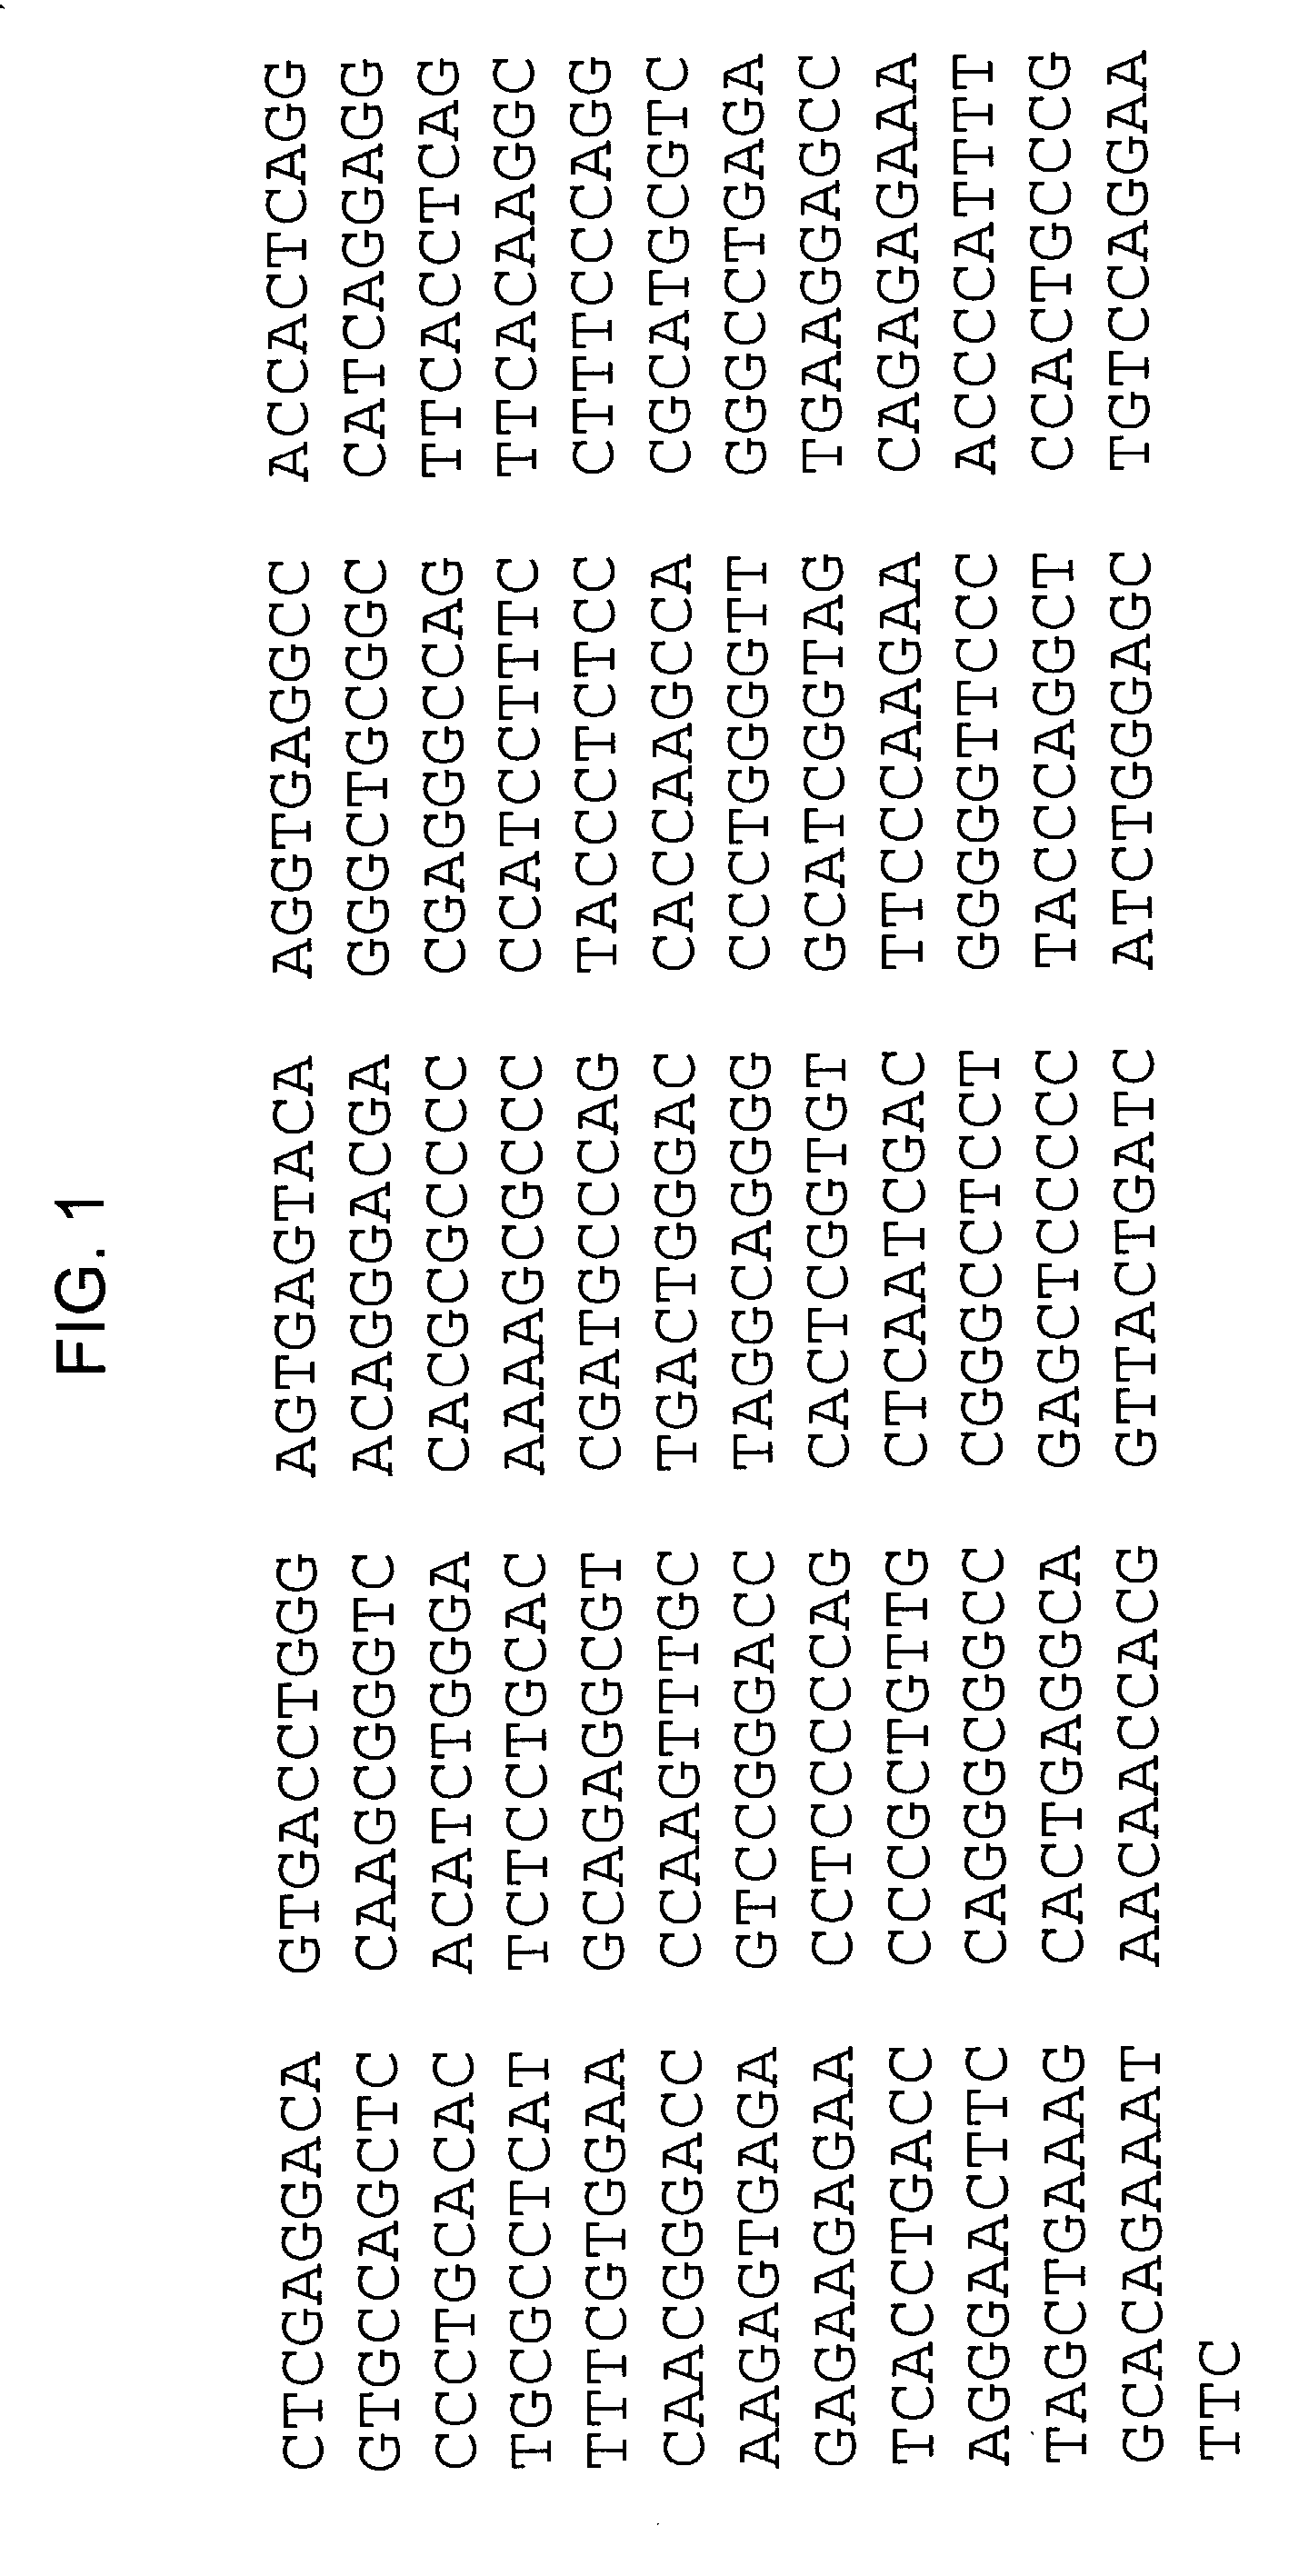 Compounds that modulate processes associated with IgE production and methods and kits for identifying and using the same